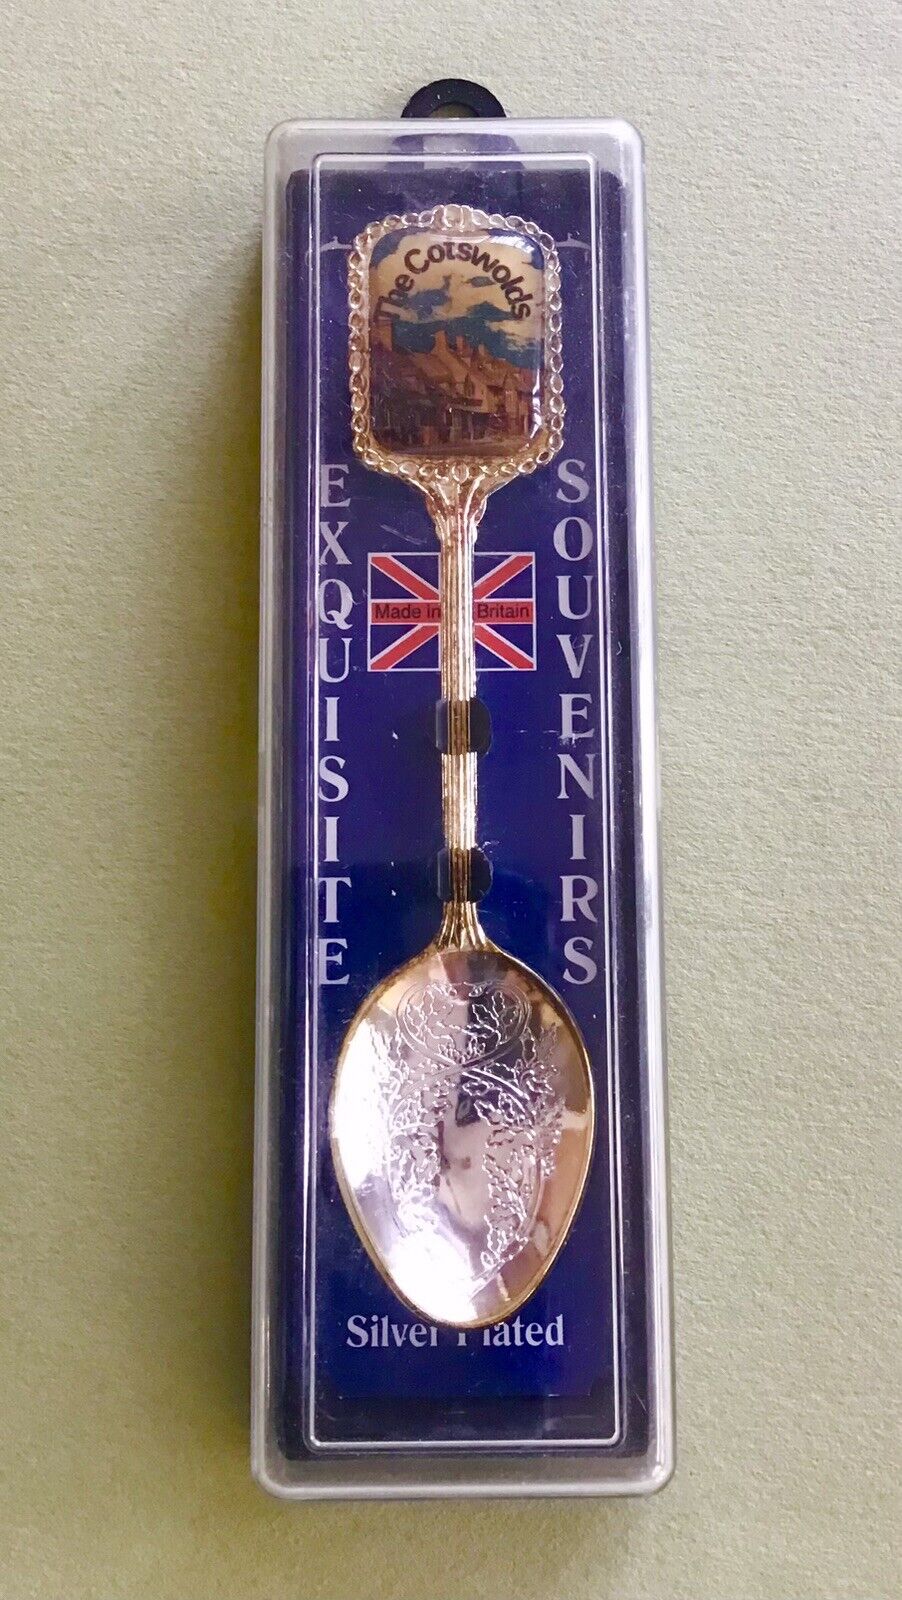 Vintage Souvenir Collectible Spoon The Cotswolds Silver Plated - New